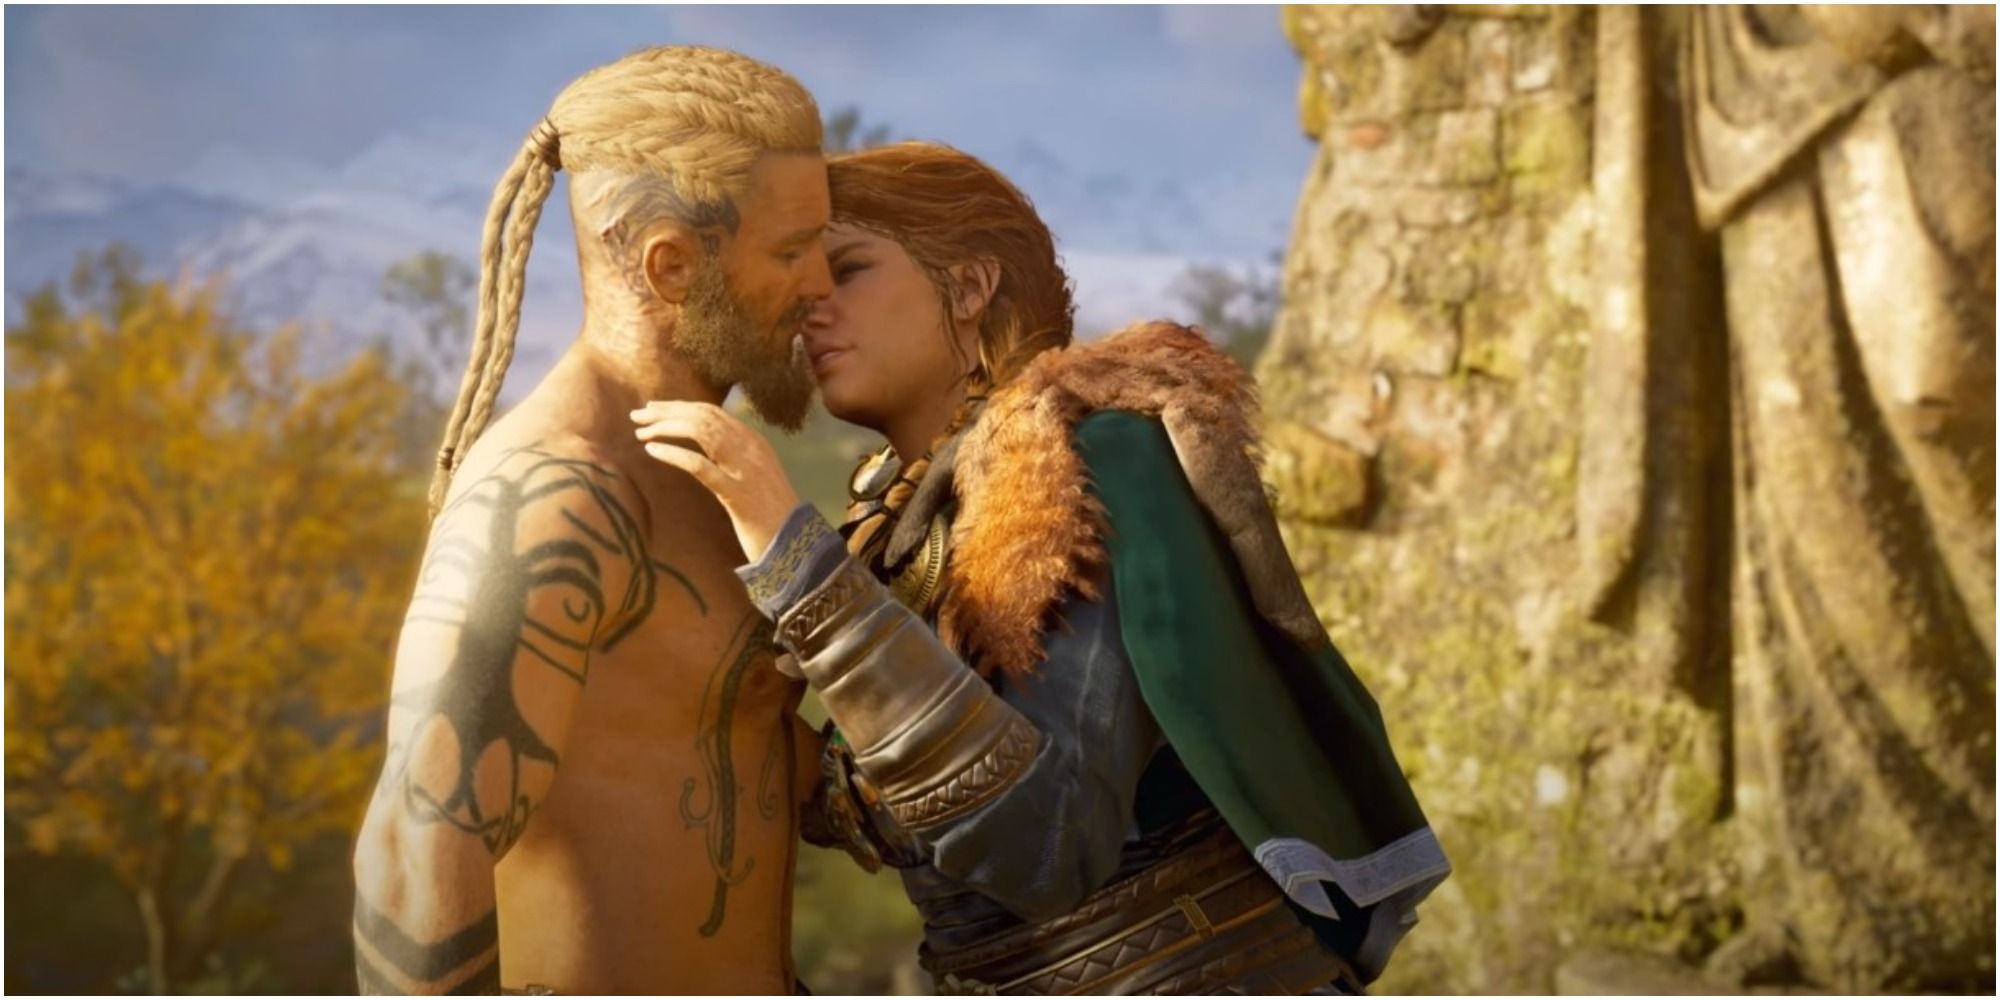 Assassin's Creed Valhalla Randvi And Eivor Kissing In The Ruins